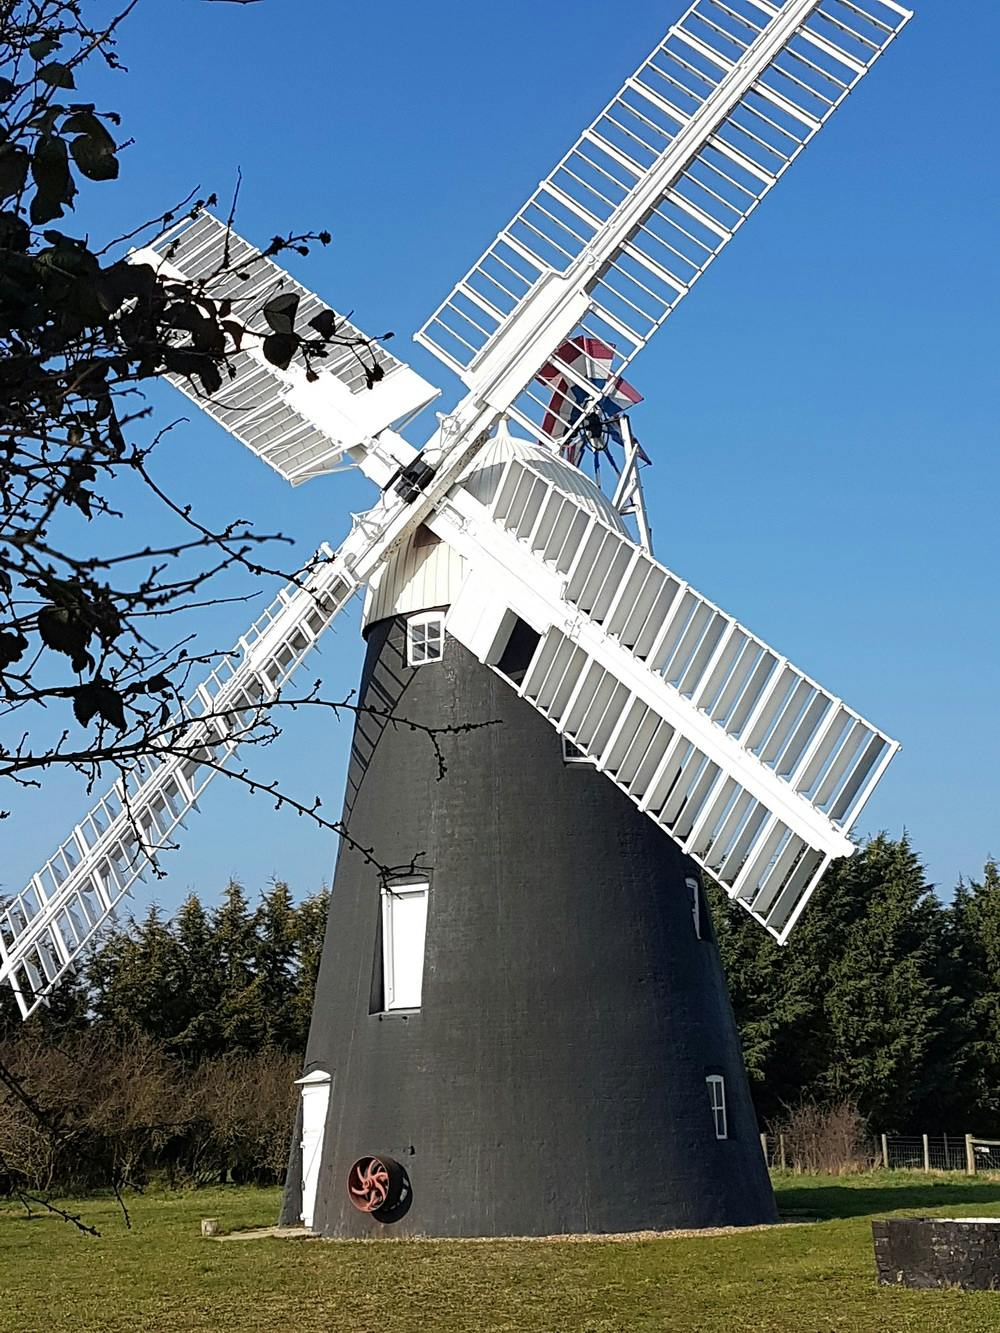 The Windmill in Thelnetham